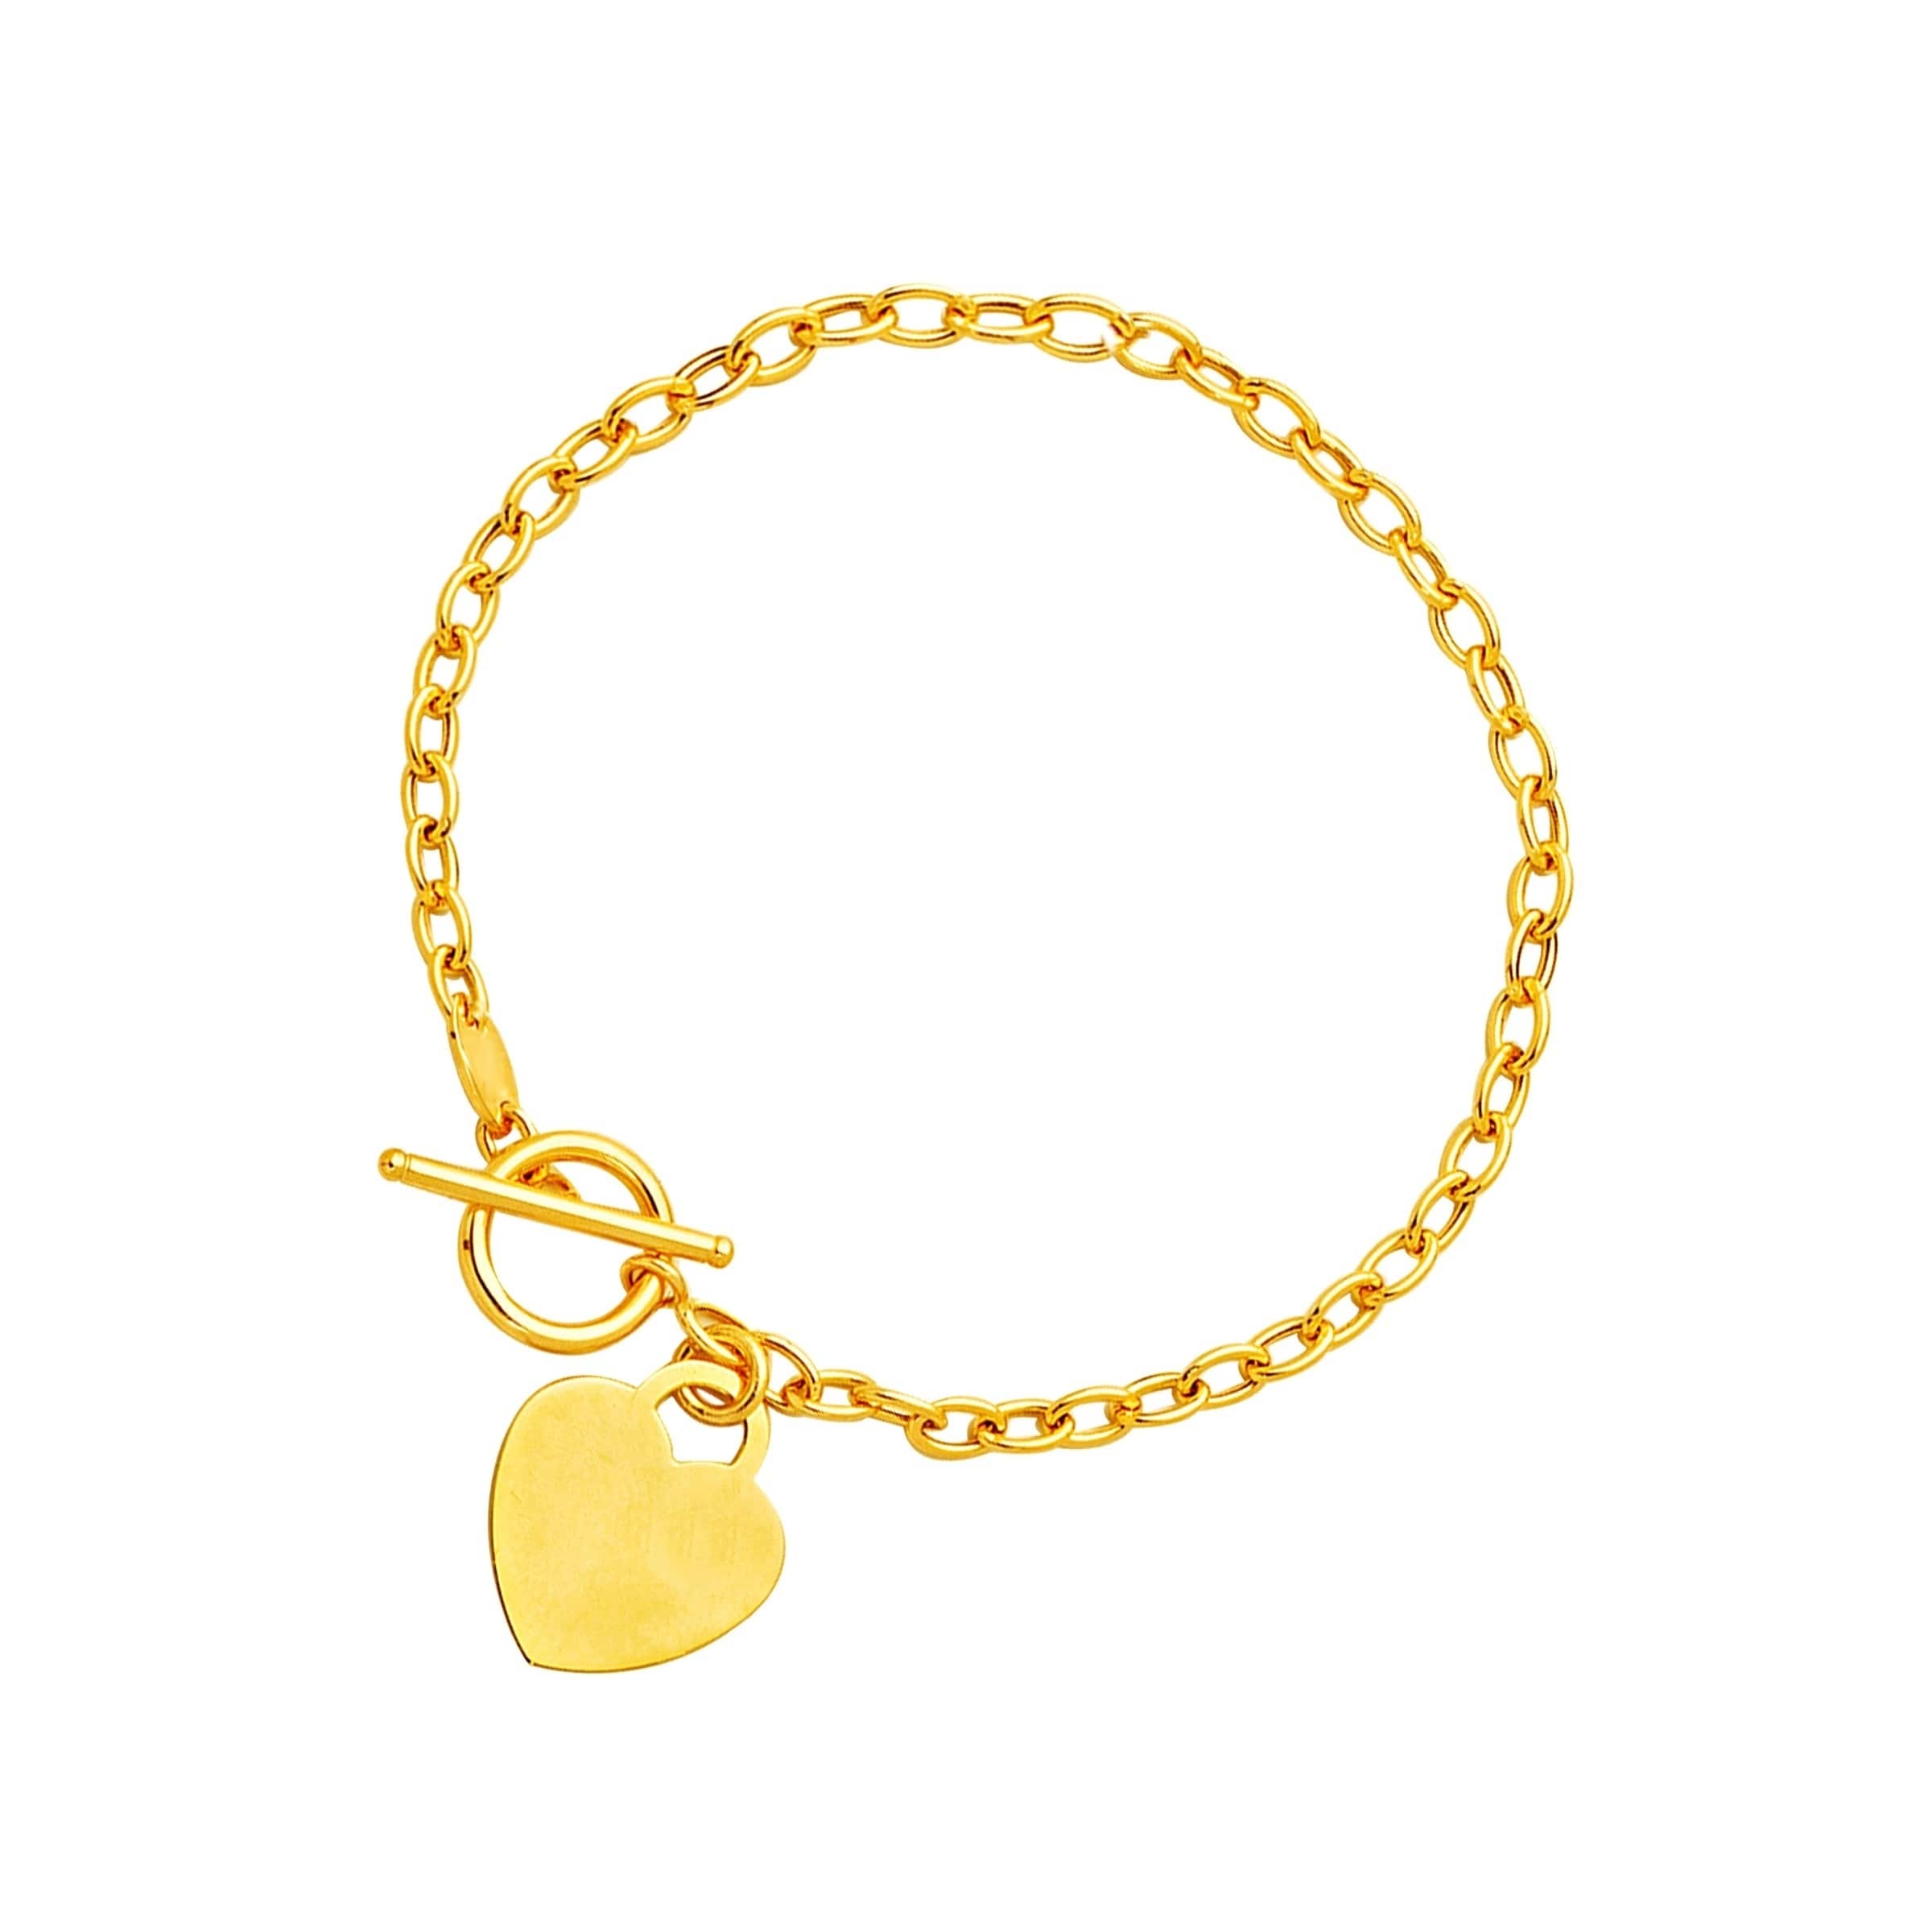 gold bracelet with heart charm